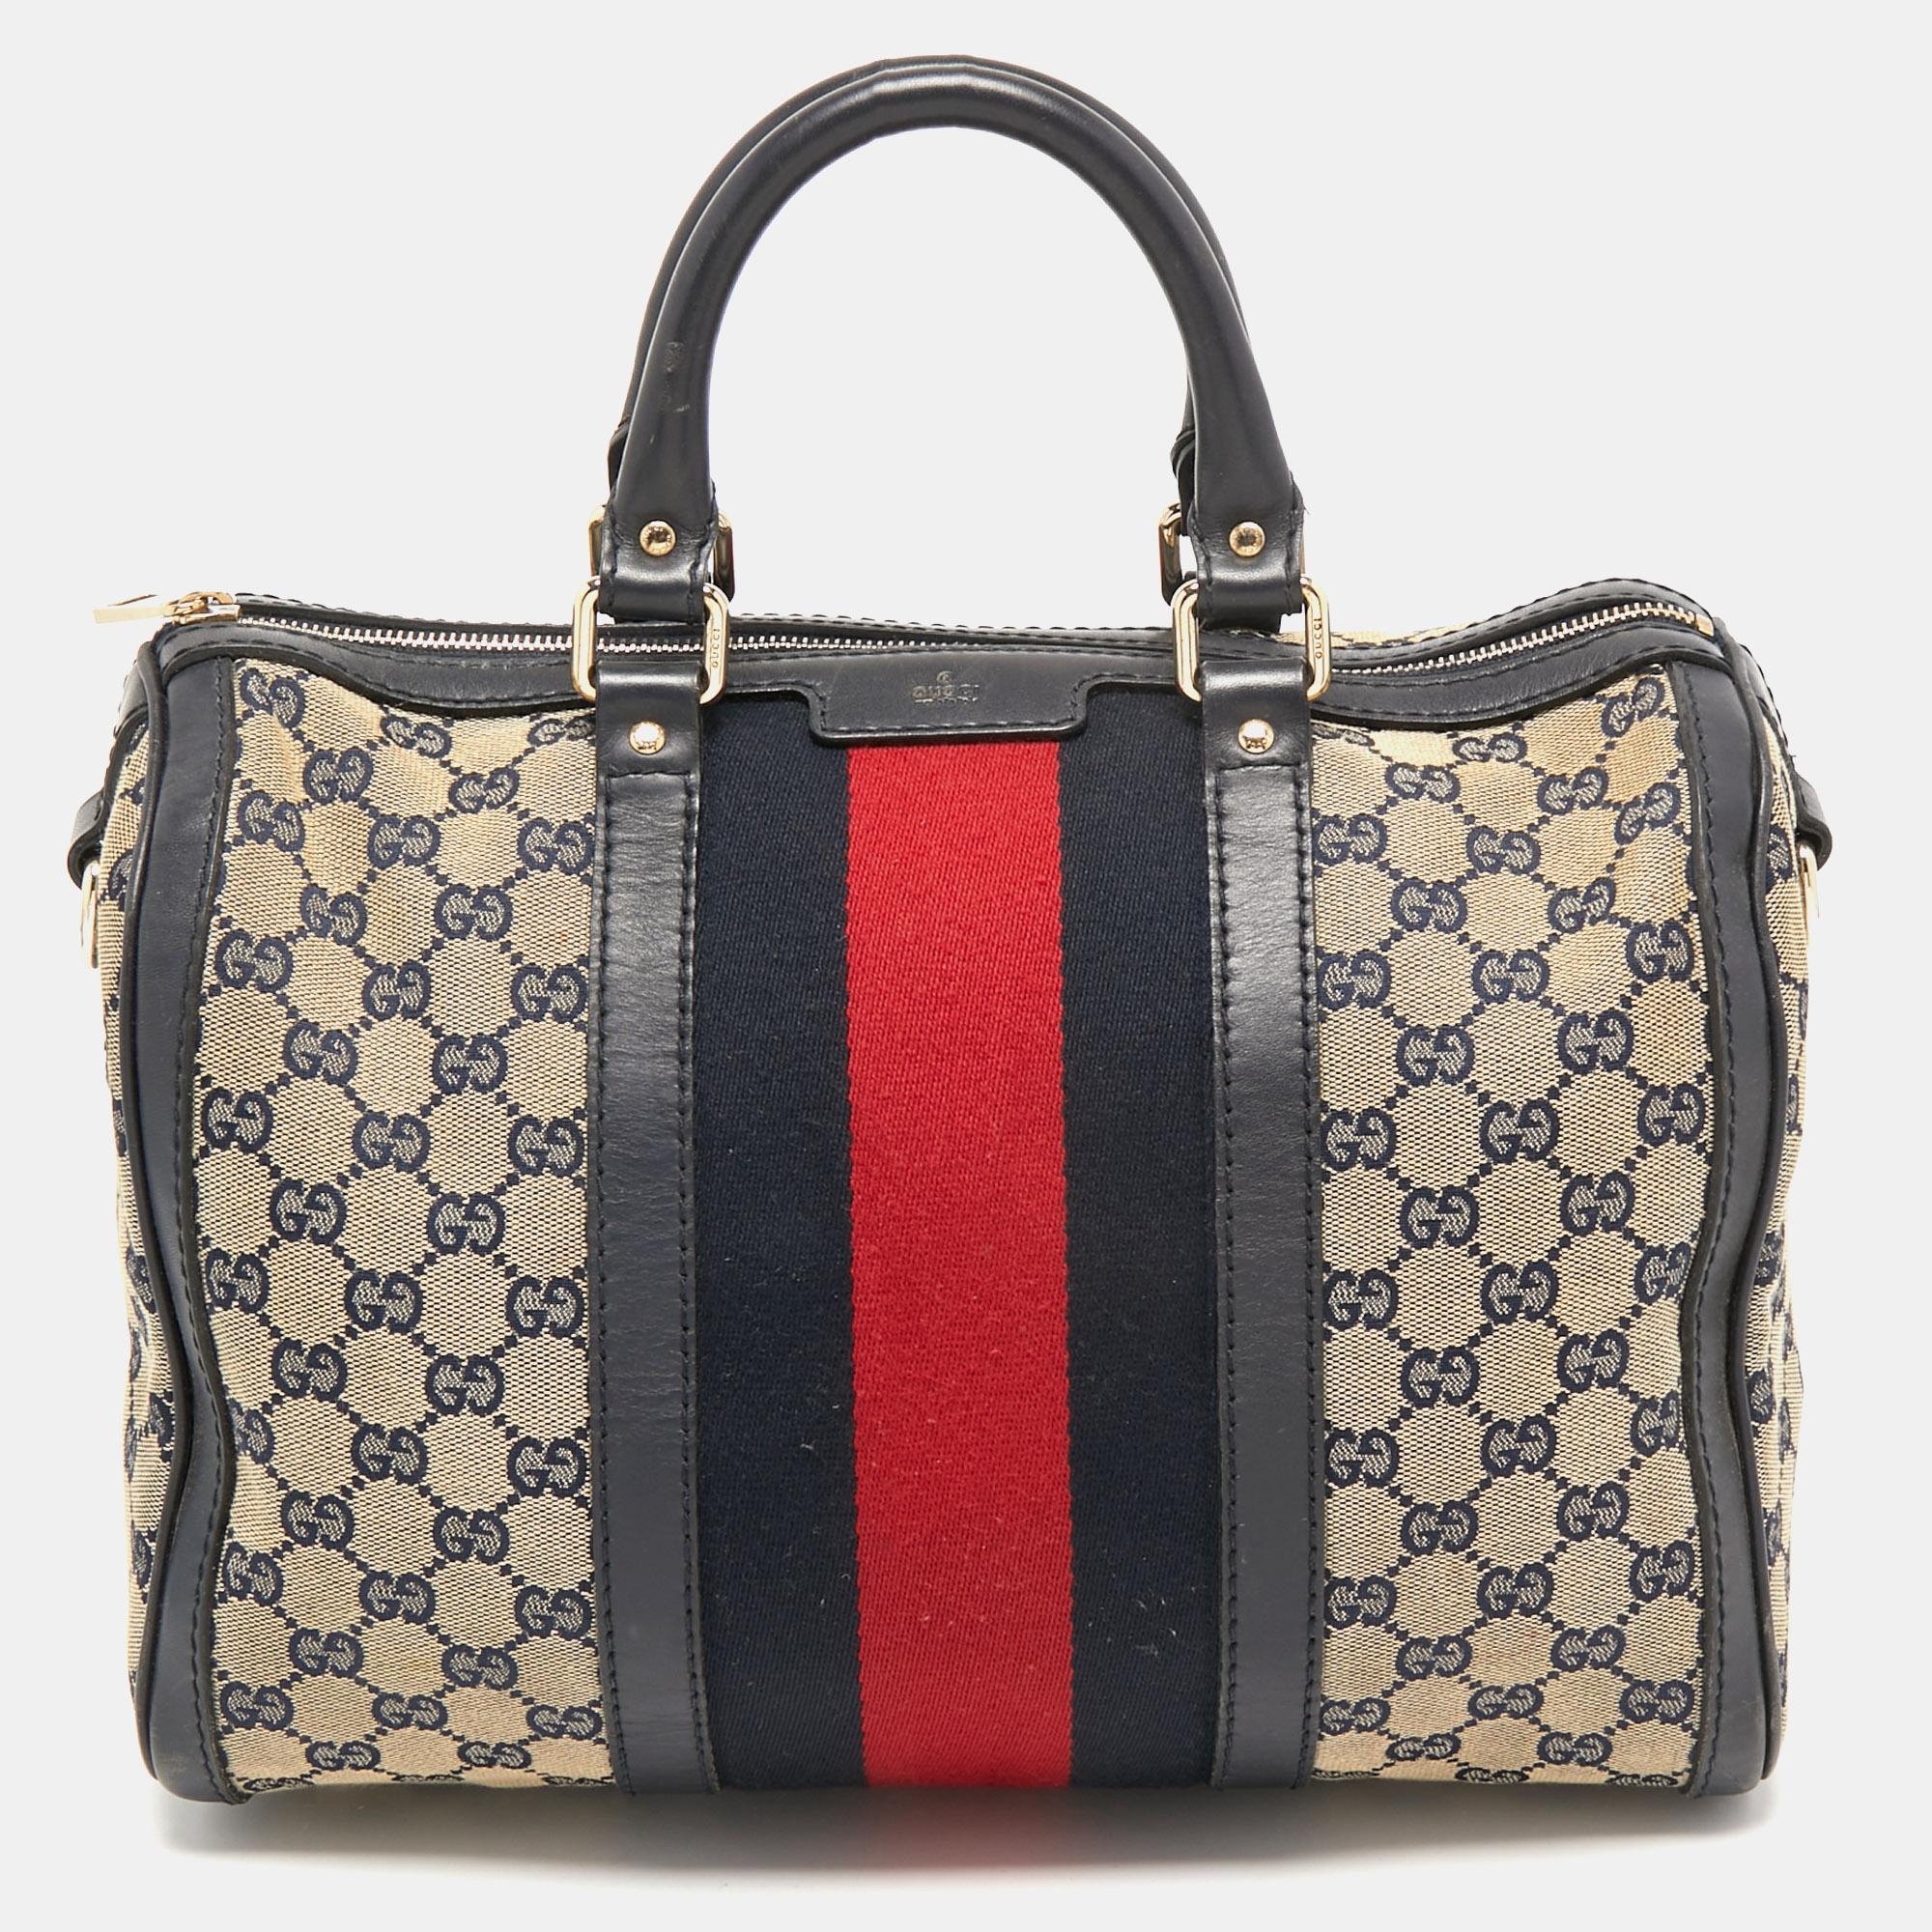 Imbued with signature elements, this Gucci bag is paired with timeless elegance and a contemporary shape. The gold-tone accents beautify the bag, and its canvas-lined interior will carry your daily essentials with ease. Crafted from the GG canvas,